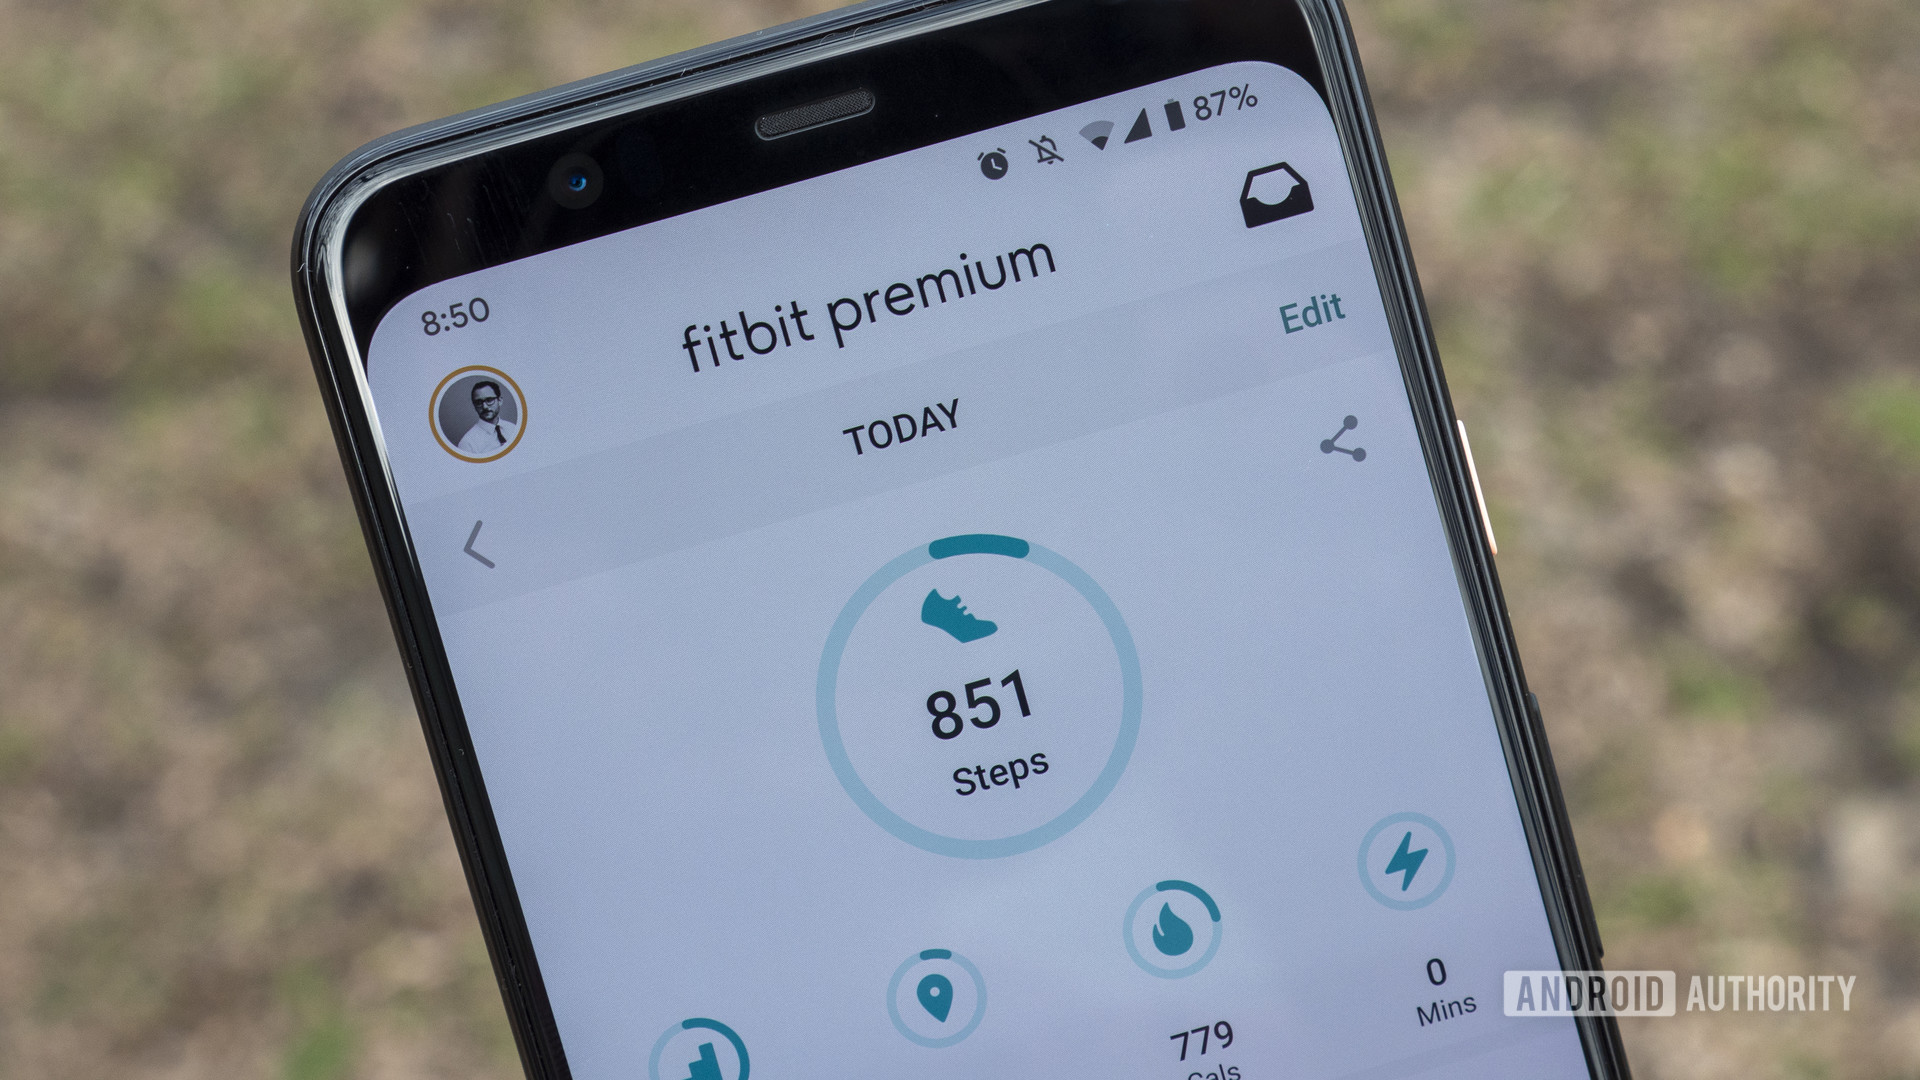 A user reviews his steps in the Fitbit app on his mobile device.